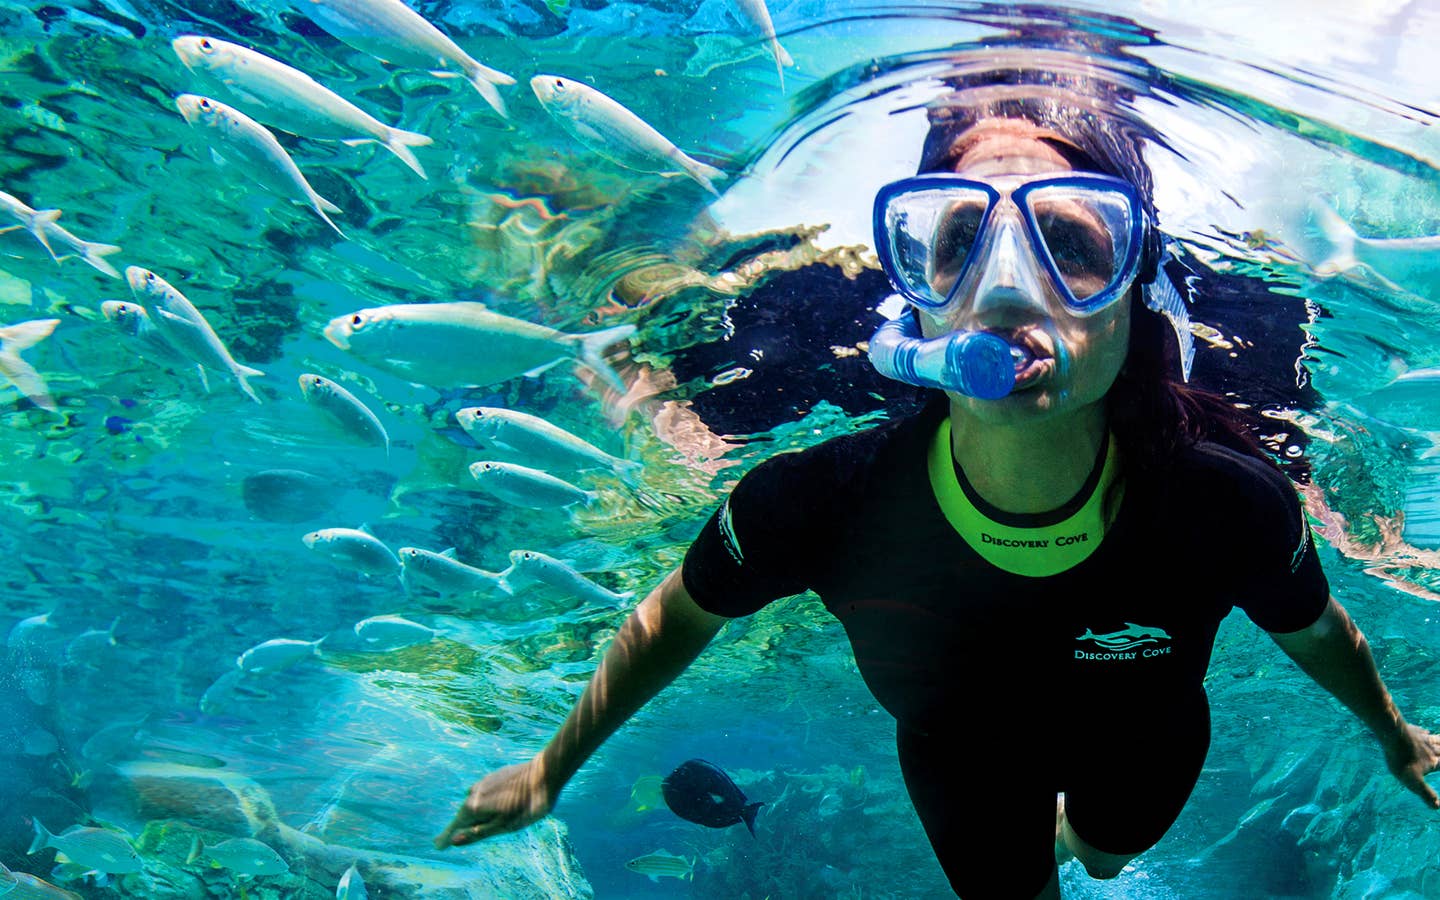 A woman snorkels among the aquatic life wearing a wetsuit.